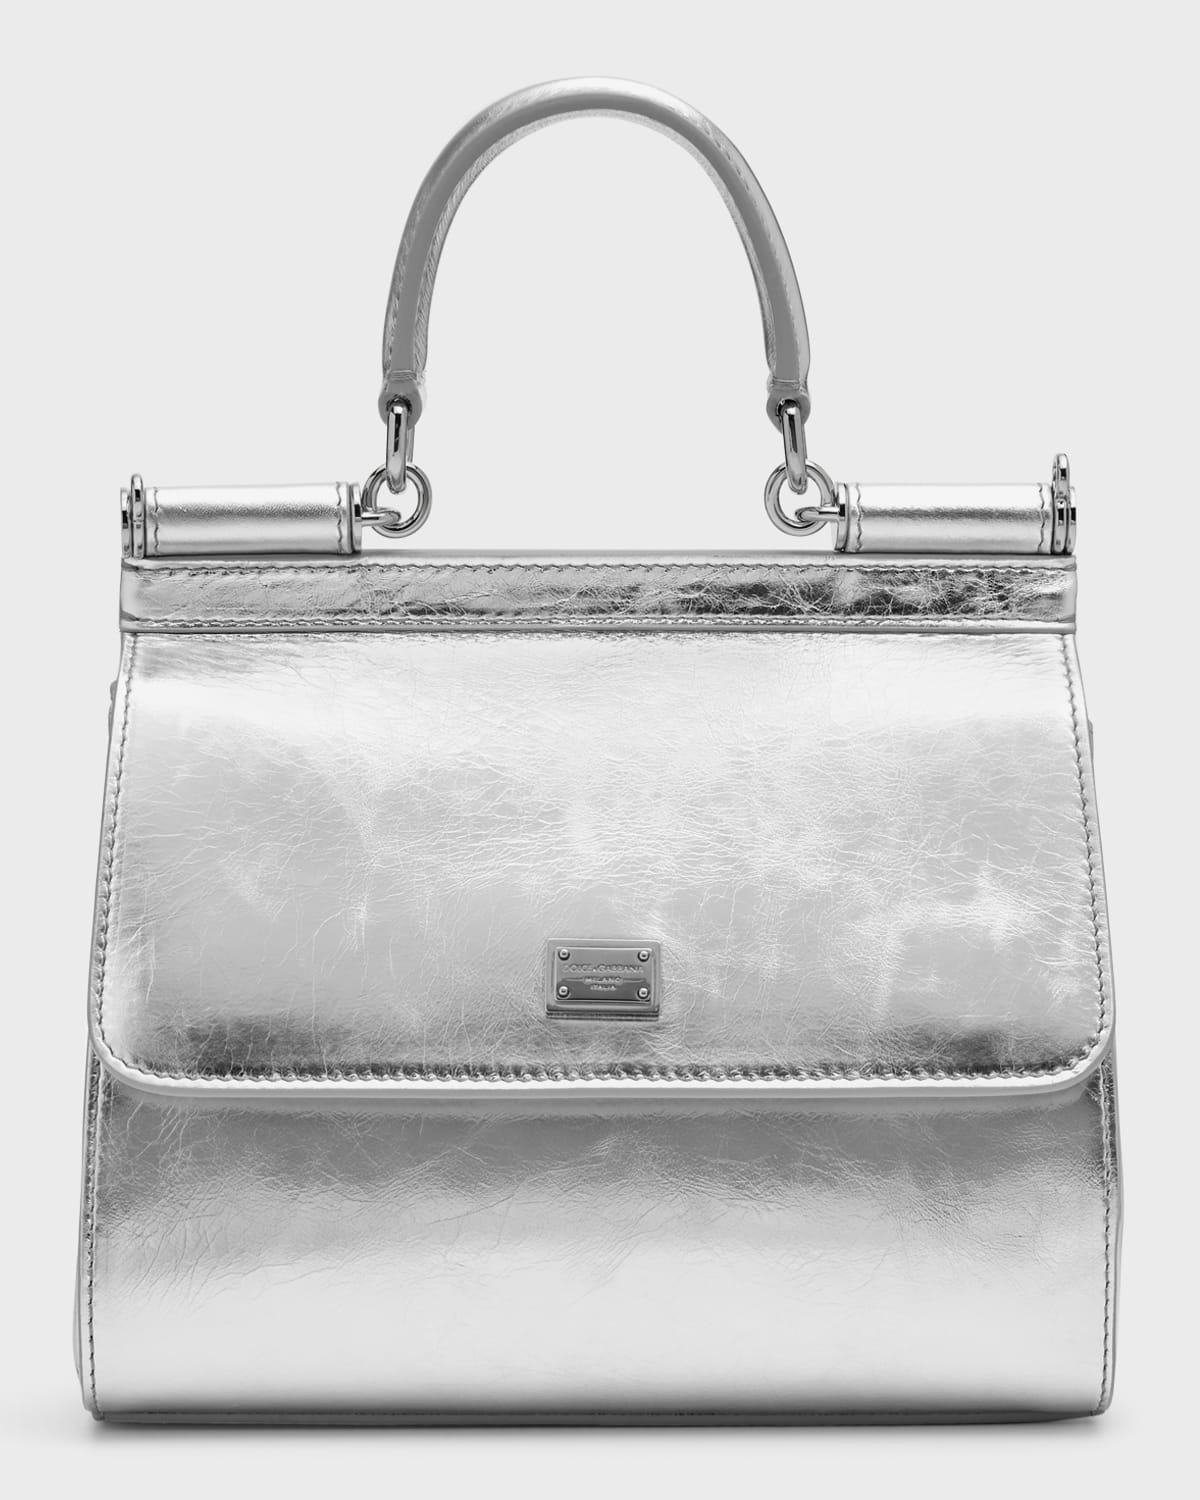 Dolce & Gabbana Sicily Metallic Leather Top-handle Bag In Silver